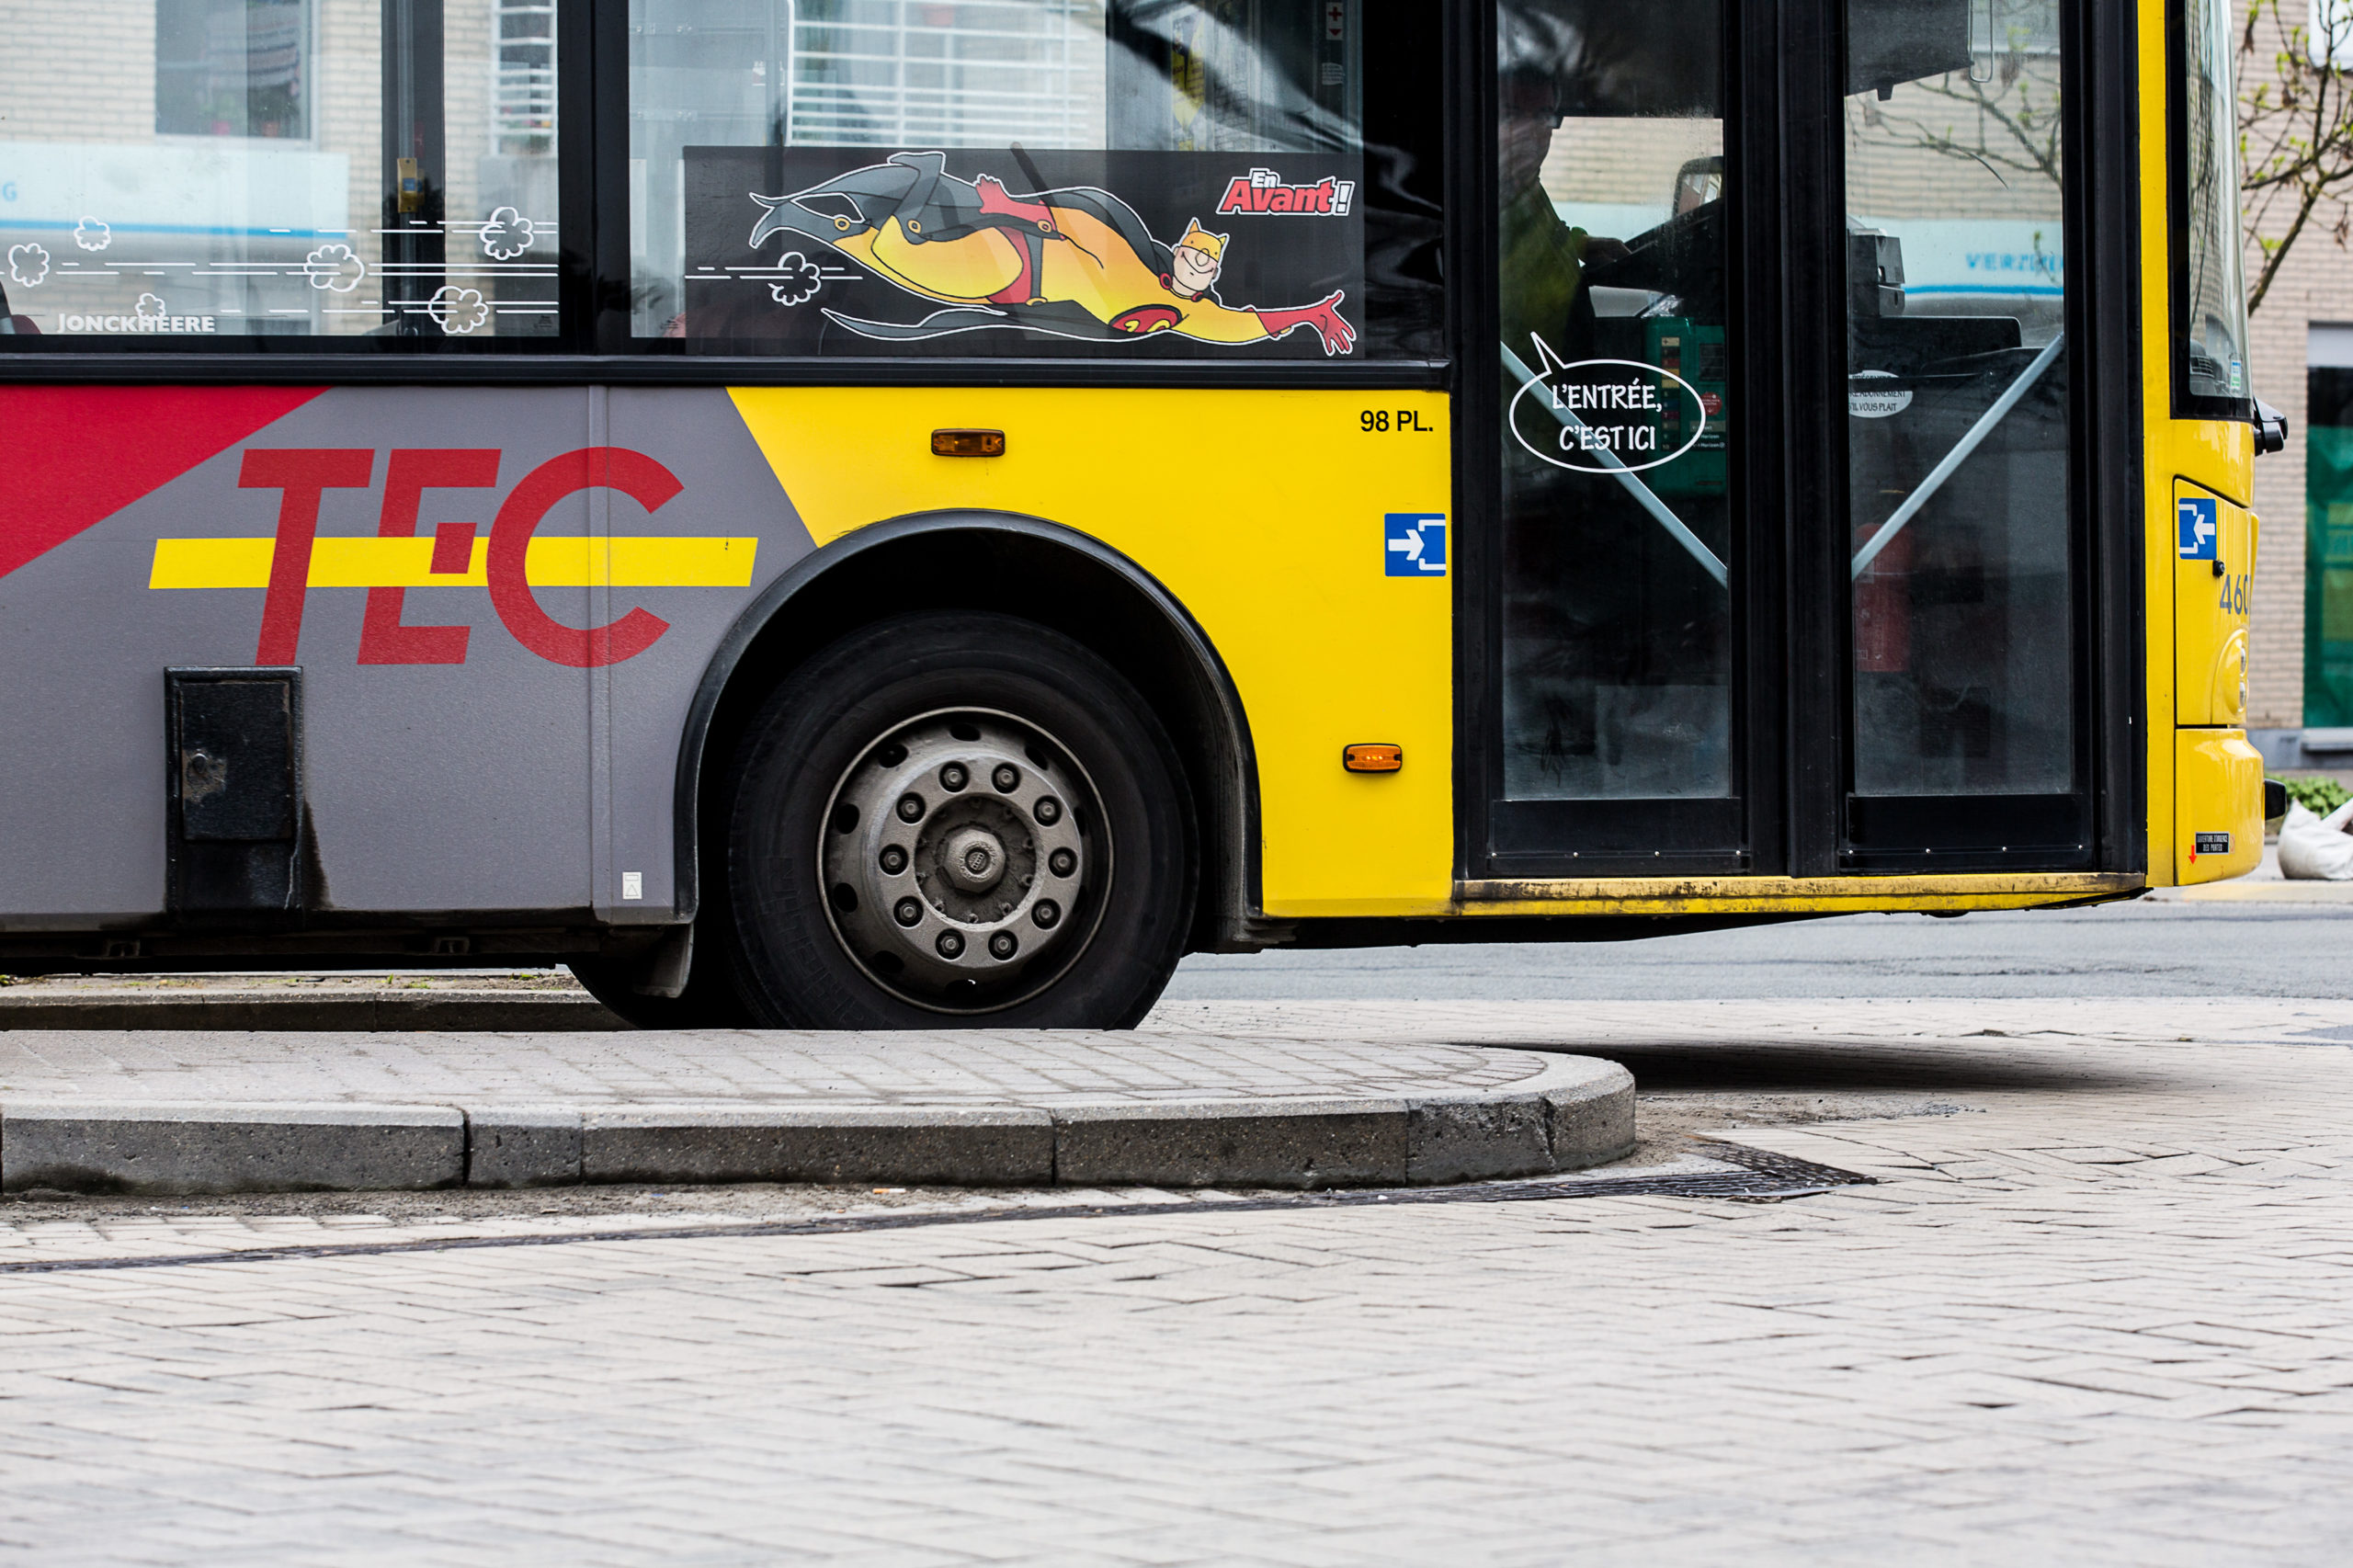 CSC union sees free public transport in Wallonia ‘achievable’